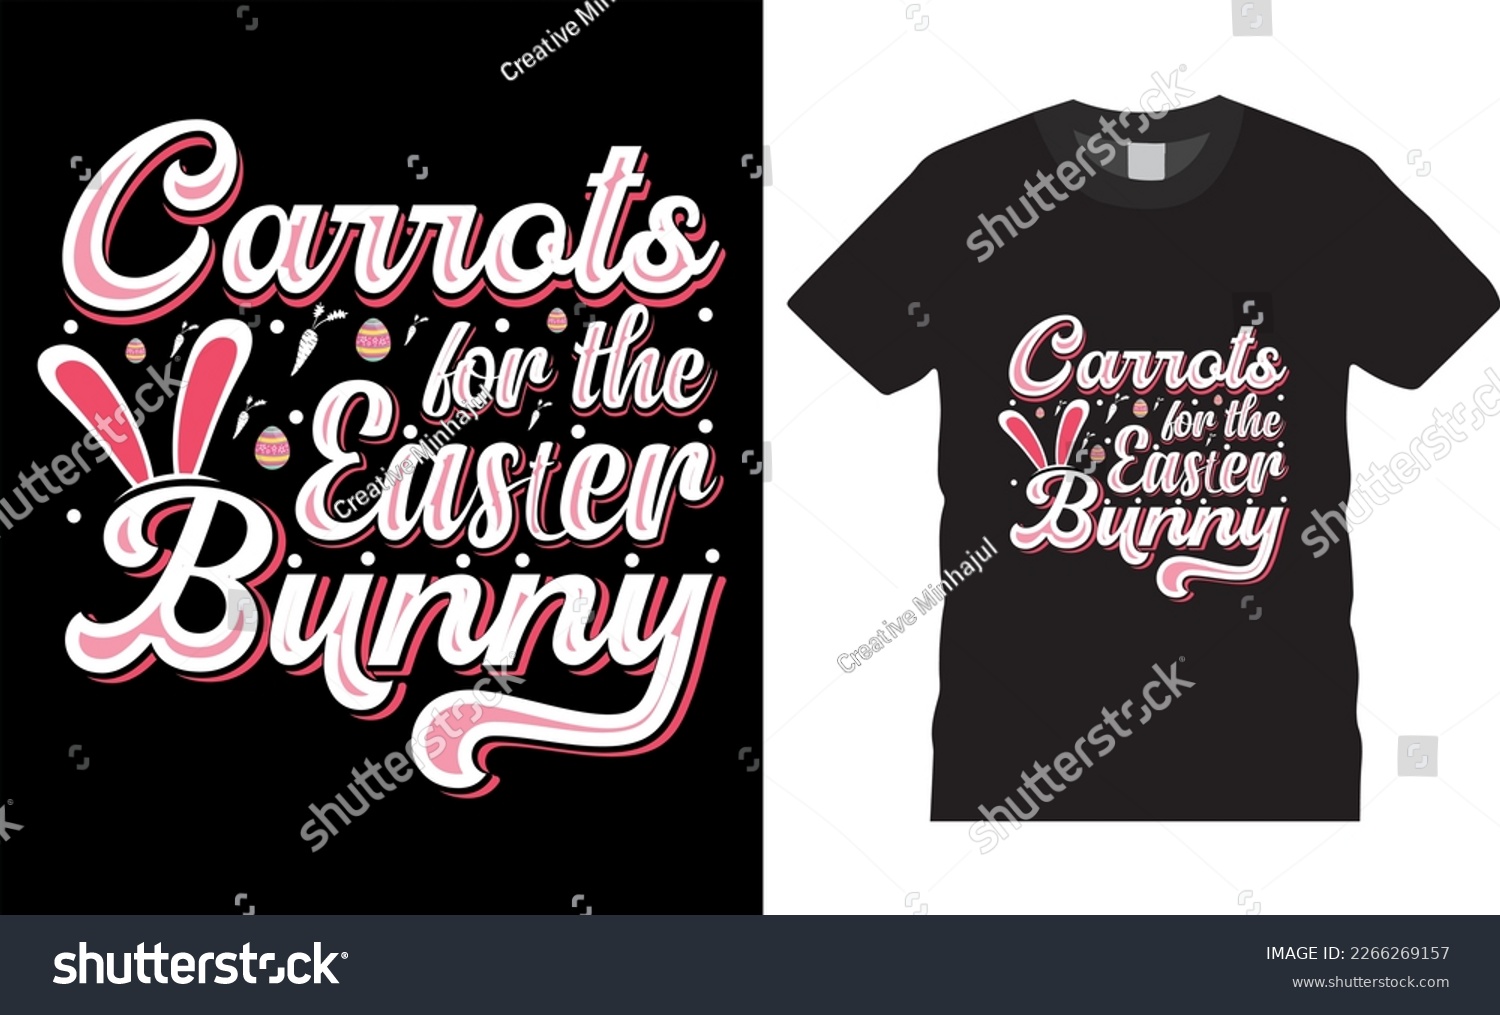 SVG of Happy easter rabbit, bunny tshirt vector design template.corrots for the easter bunny t-shirt design.Ready to print for apparel, poster, mug and greeting plate illustration. svg